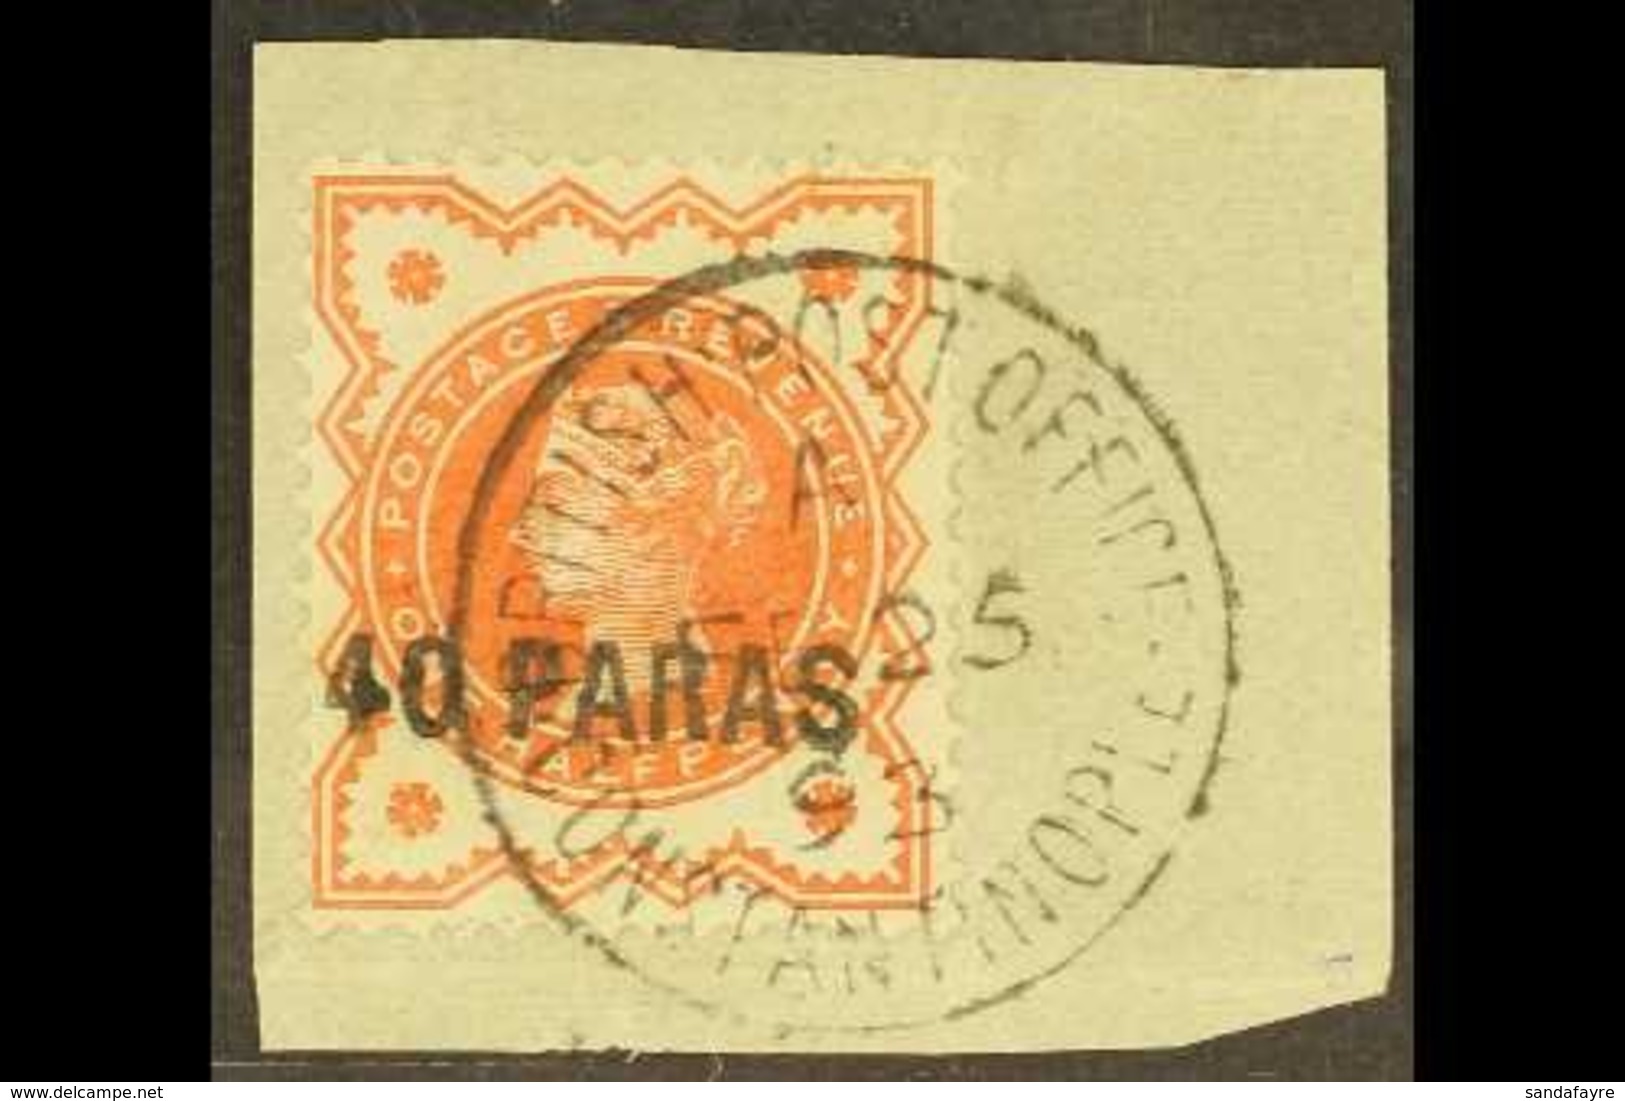 1893  40pa On ½d Vermilion, SG 7, Superb Used On Piece With "full S", Showing Complete Constantinople Fe 25 93 Cds. For  - British Levant